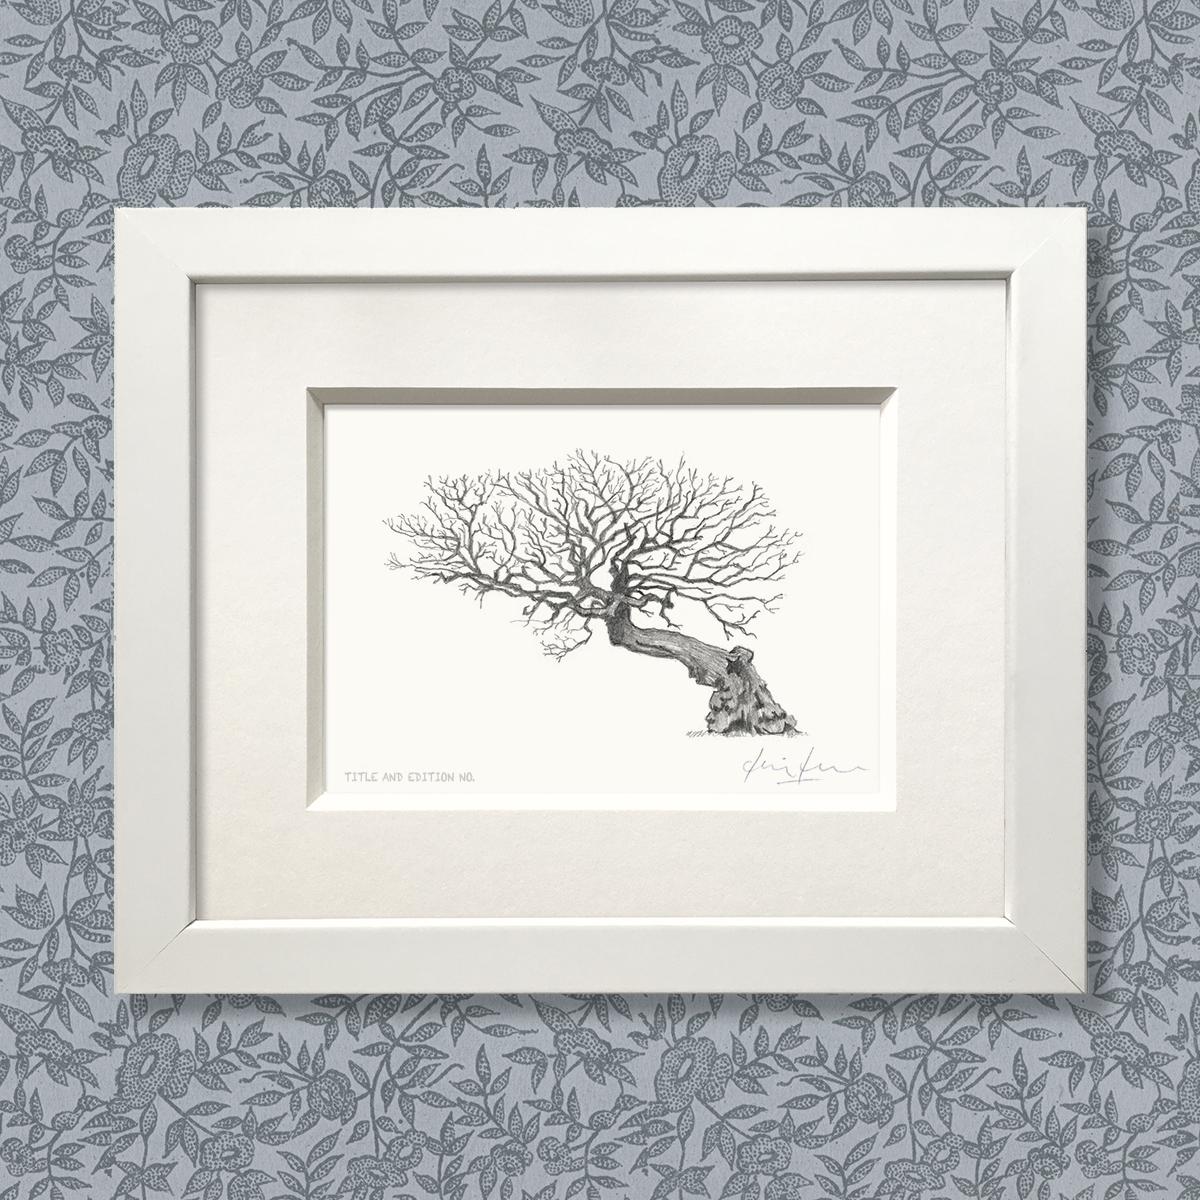 Limited edition print from pencil drawing of an old tree in a white frame